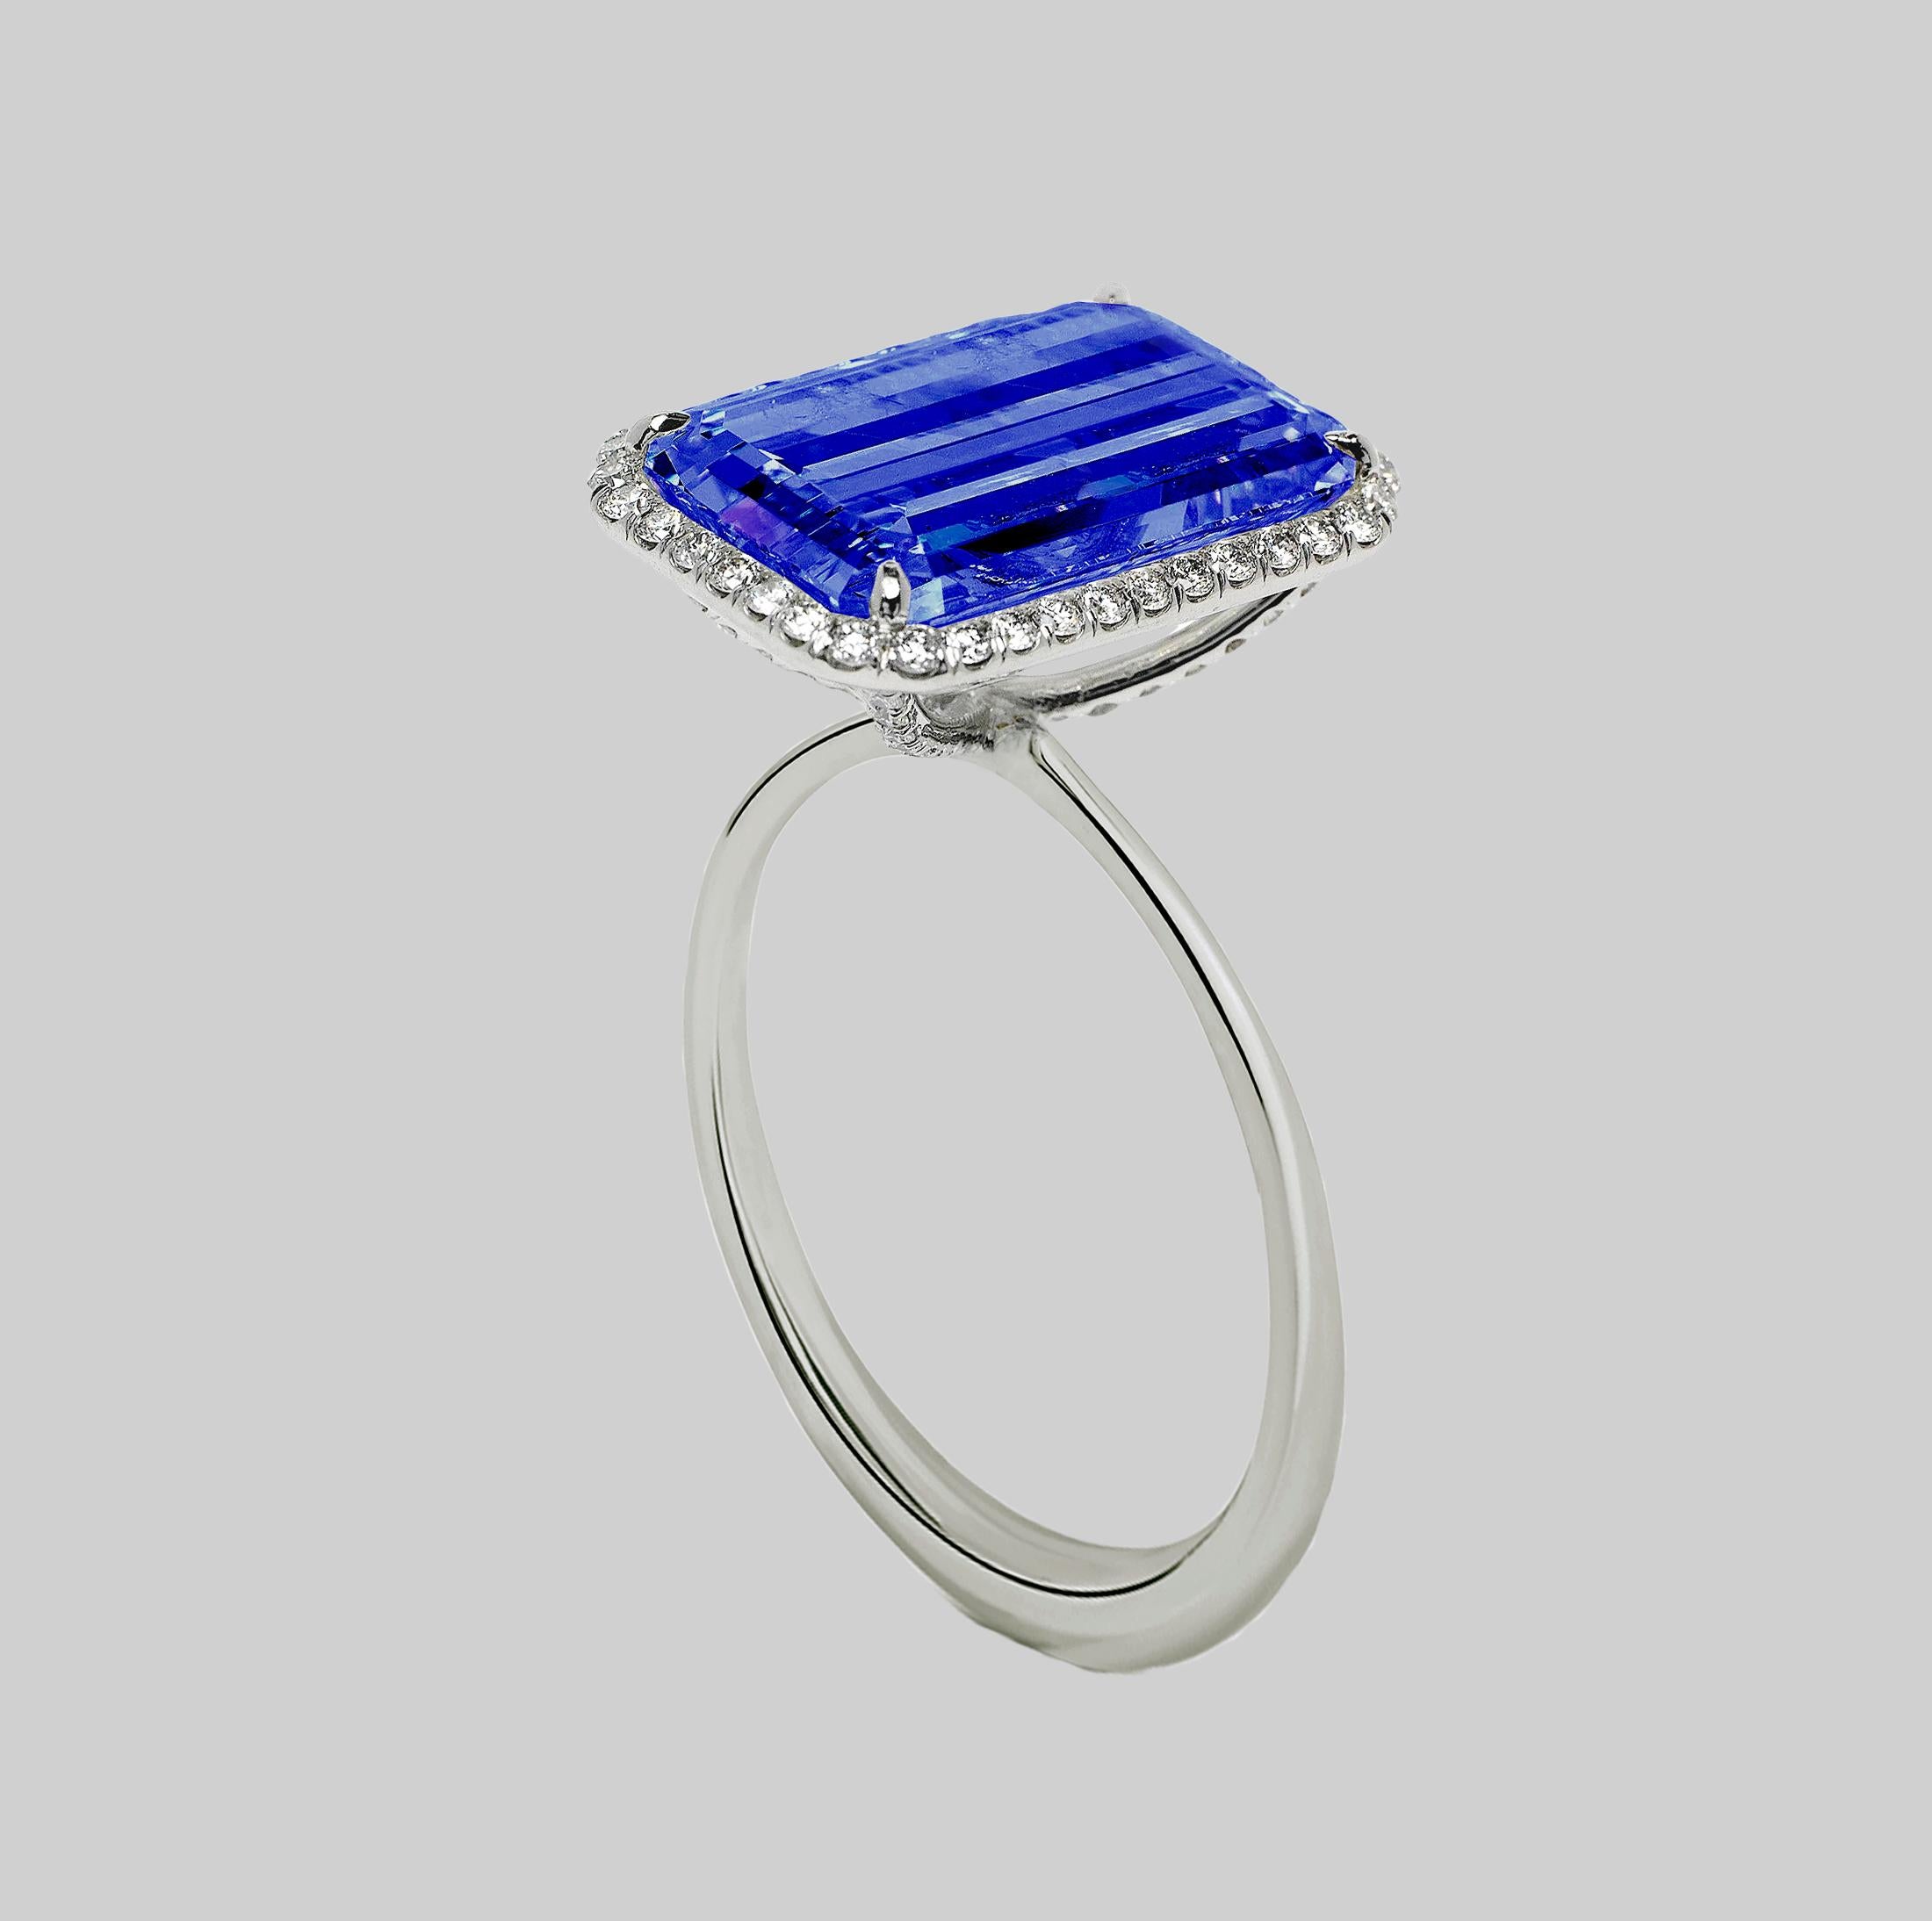 An exquisite unheated large blue sapphire from Srilanka with a phenomenal color a royal blue vivid hue. The sapphire has not been treated in any way is a pristine emerald cut sapphire that has eye clean with vs clarity.

A stone of this size with